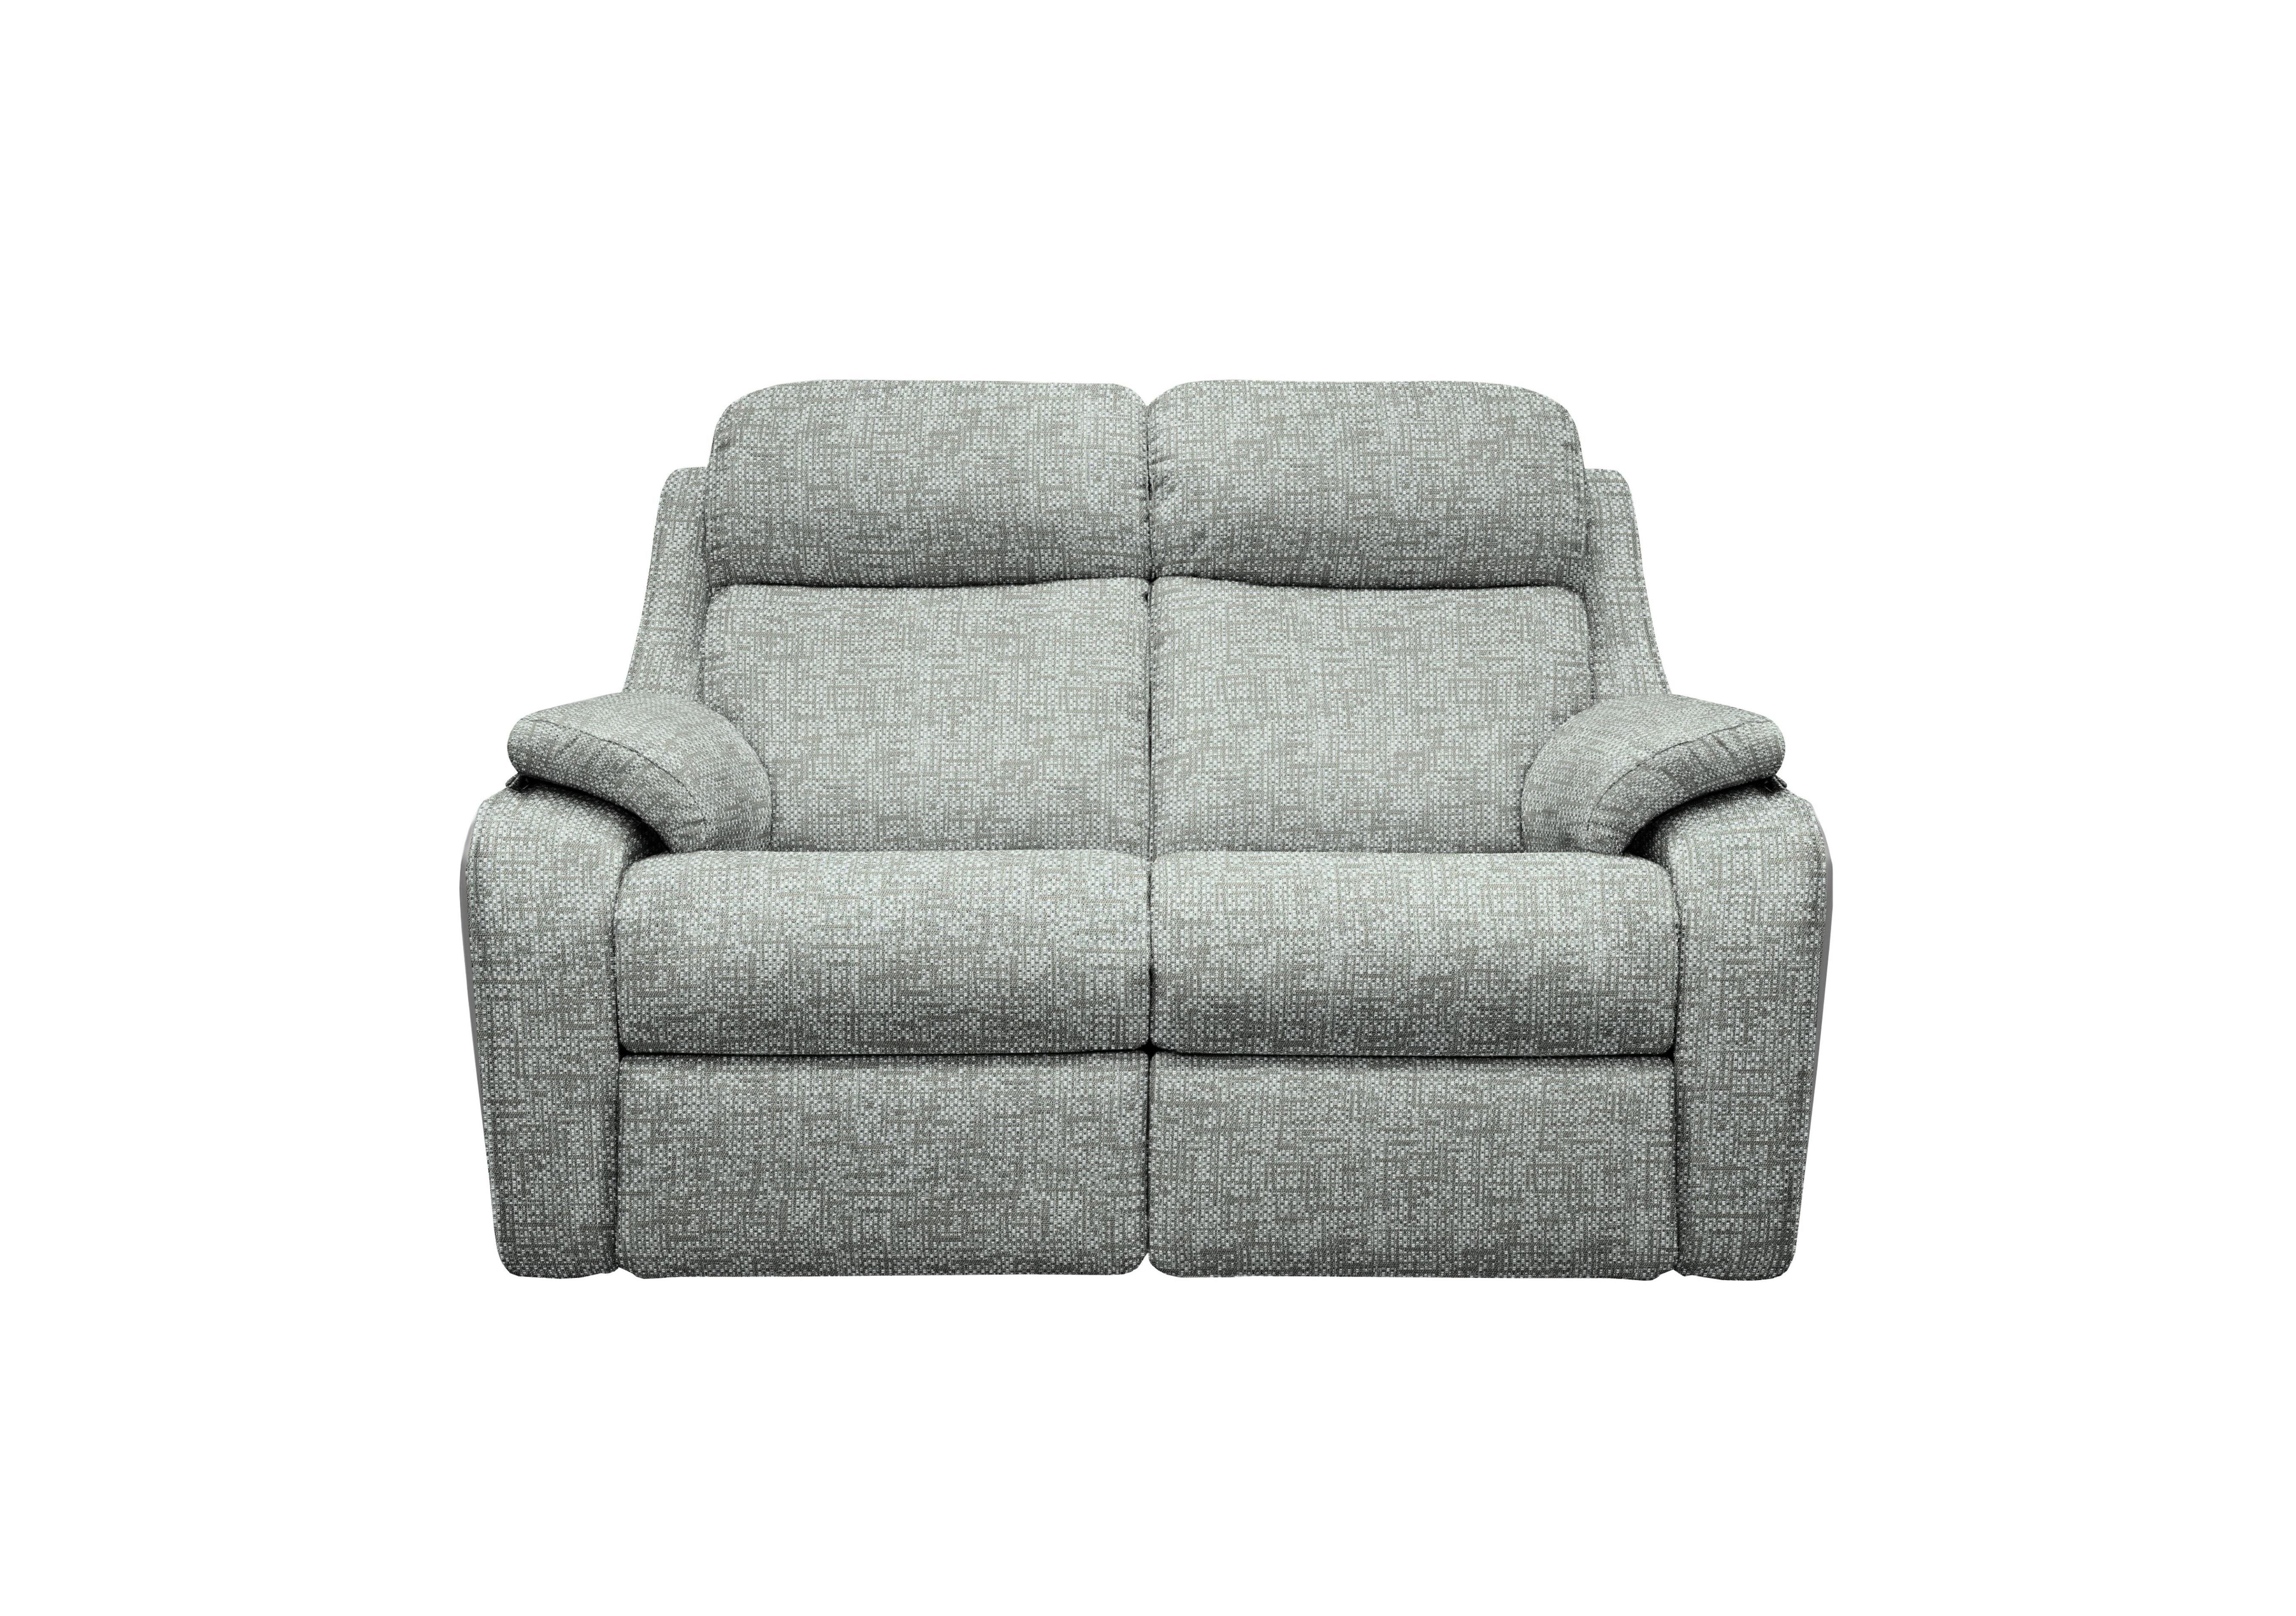 Kingsbury 2 Seater Fabric Sofa in B032 Remco Duck Egg on Furniture Village